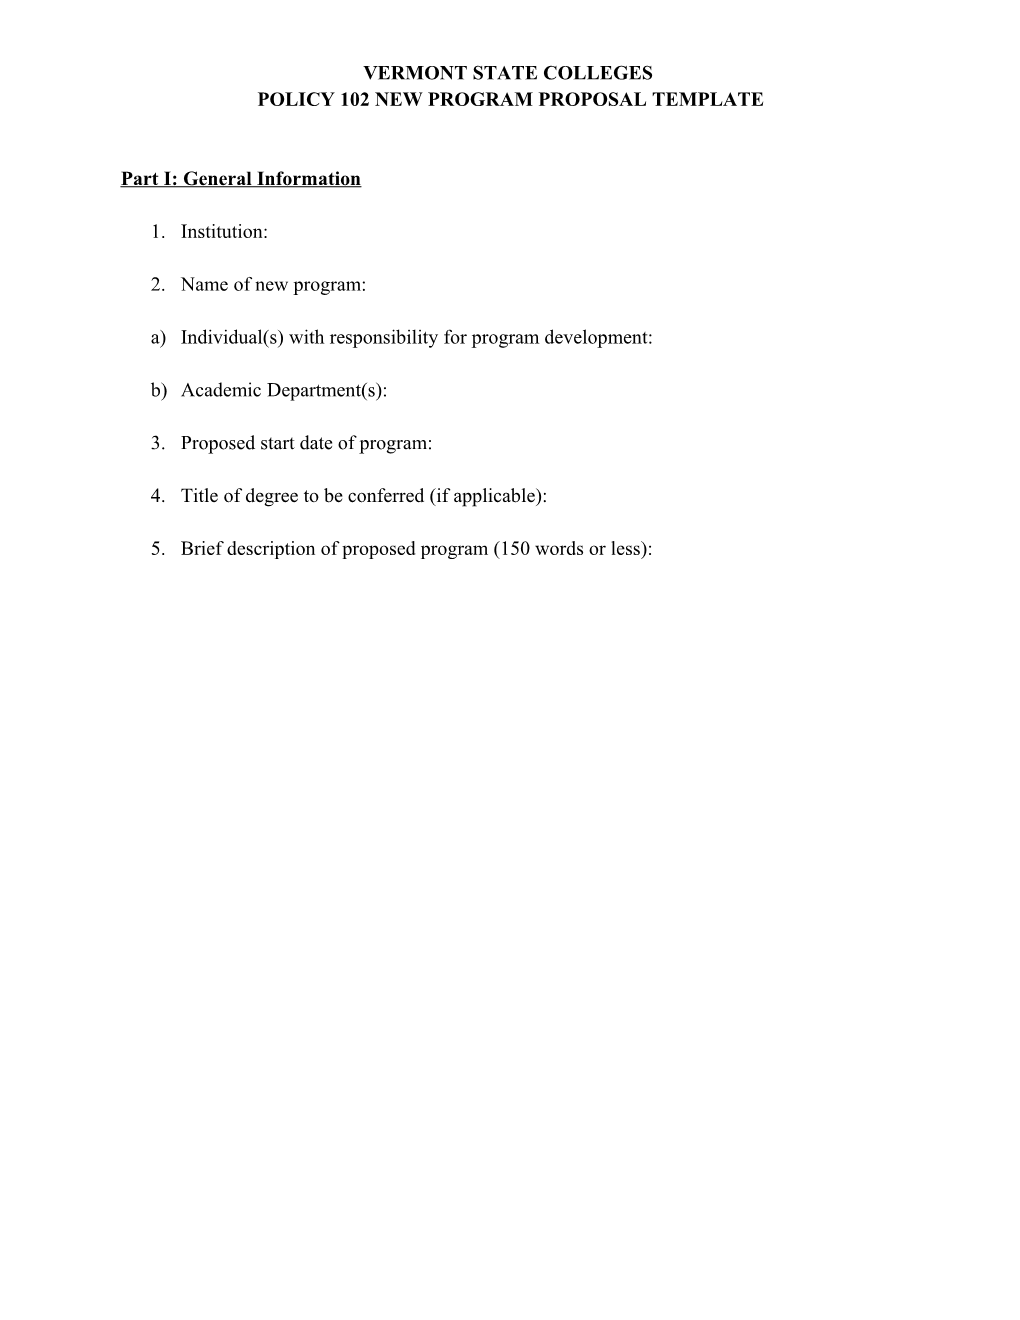 Policy 102 New Program Proposal Template